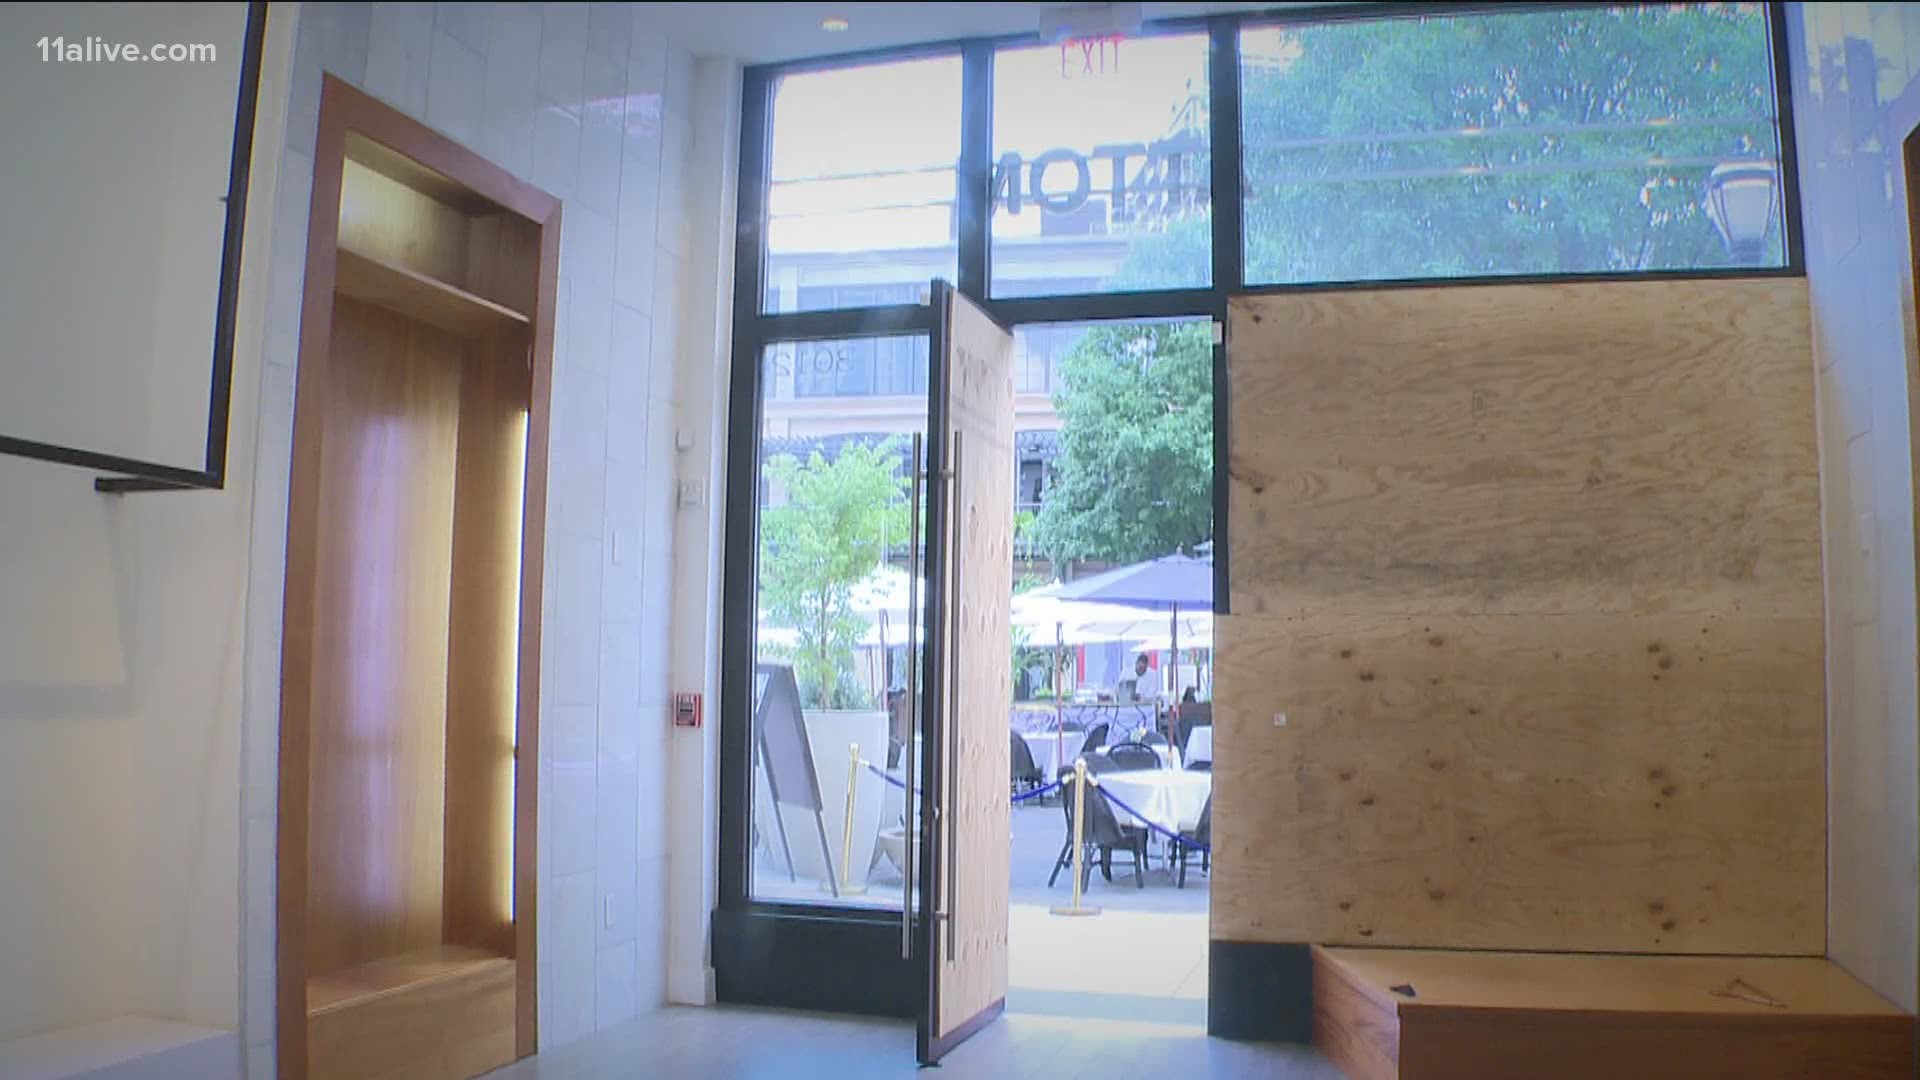 11Alive spoke to two business owners about how it's impacting them.